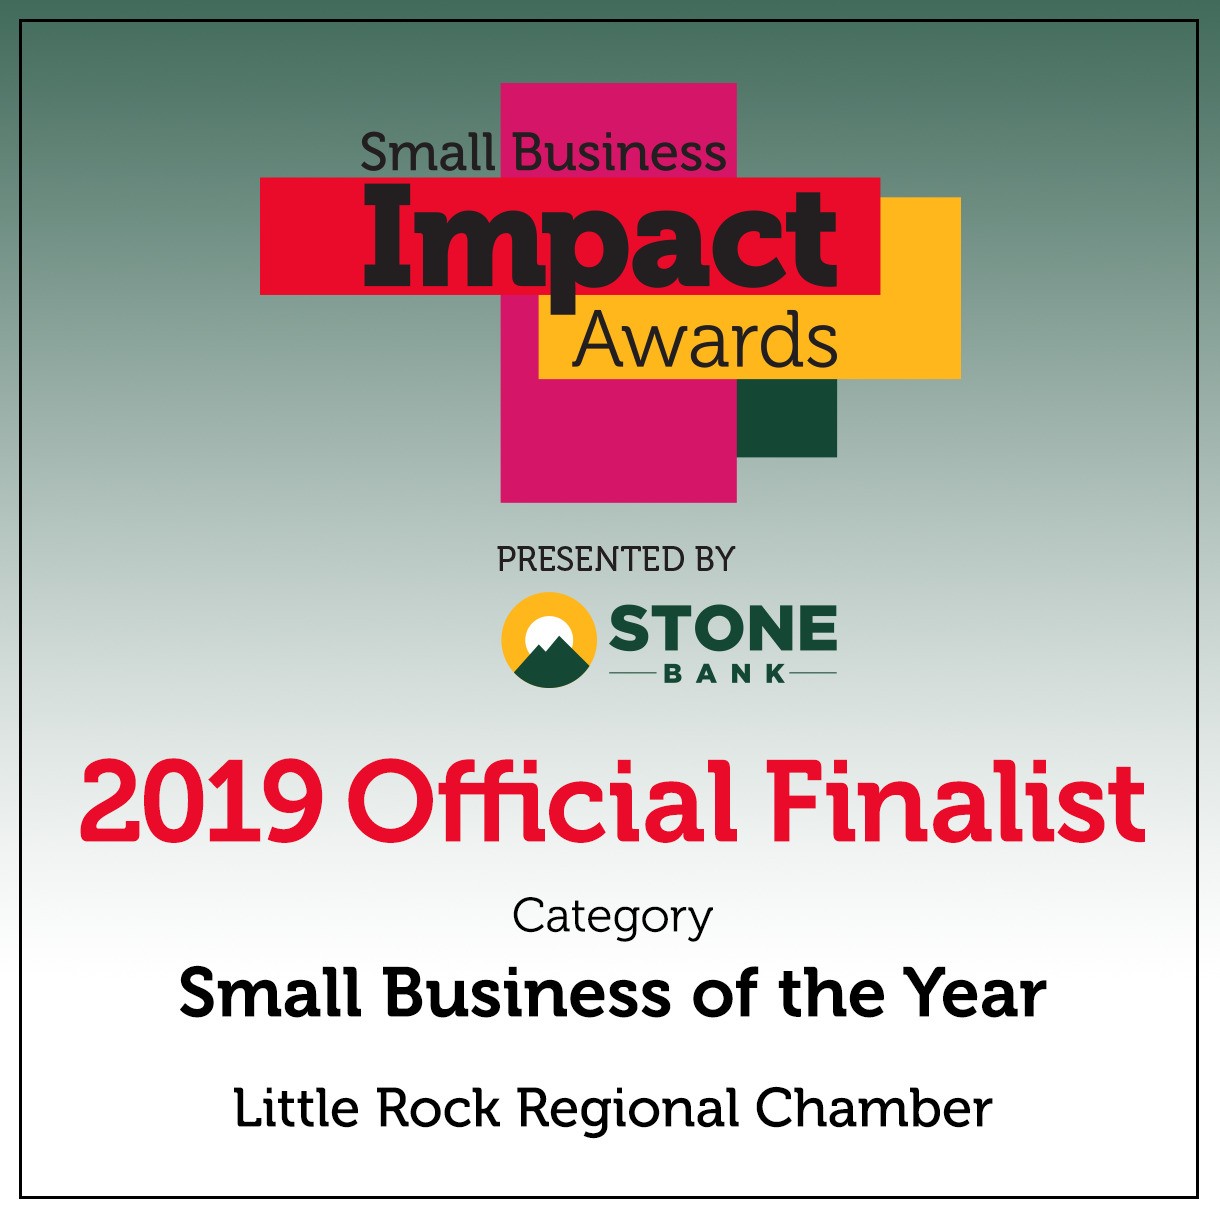 Steco Nominated for 2019 Small Business of the Year!